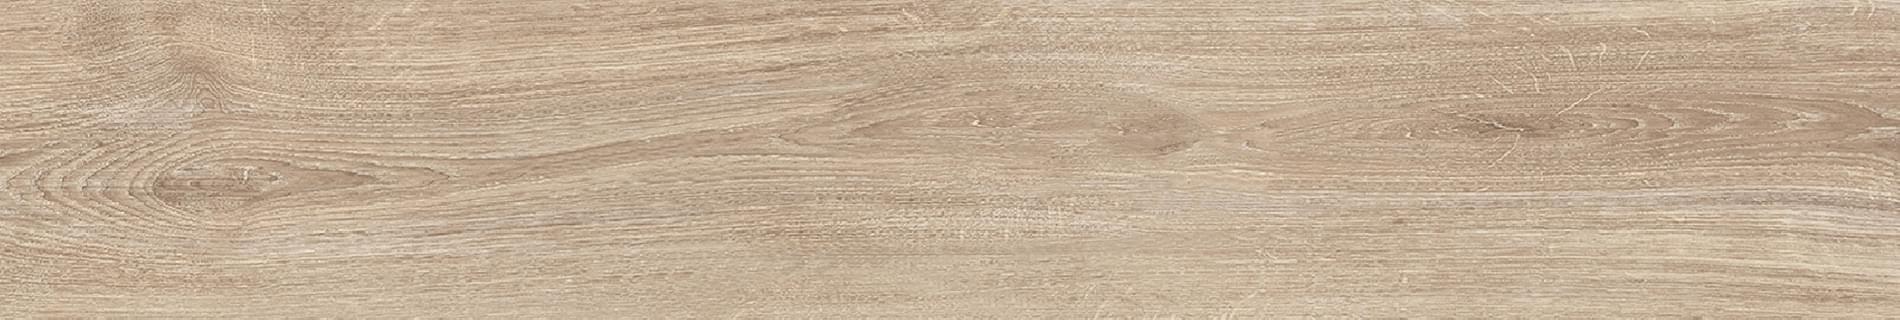 Ergon Woodtouch Miele Naturale 20x120